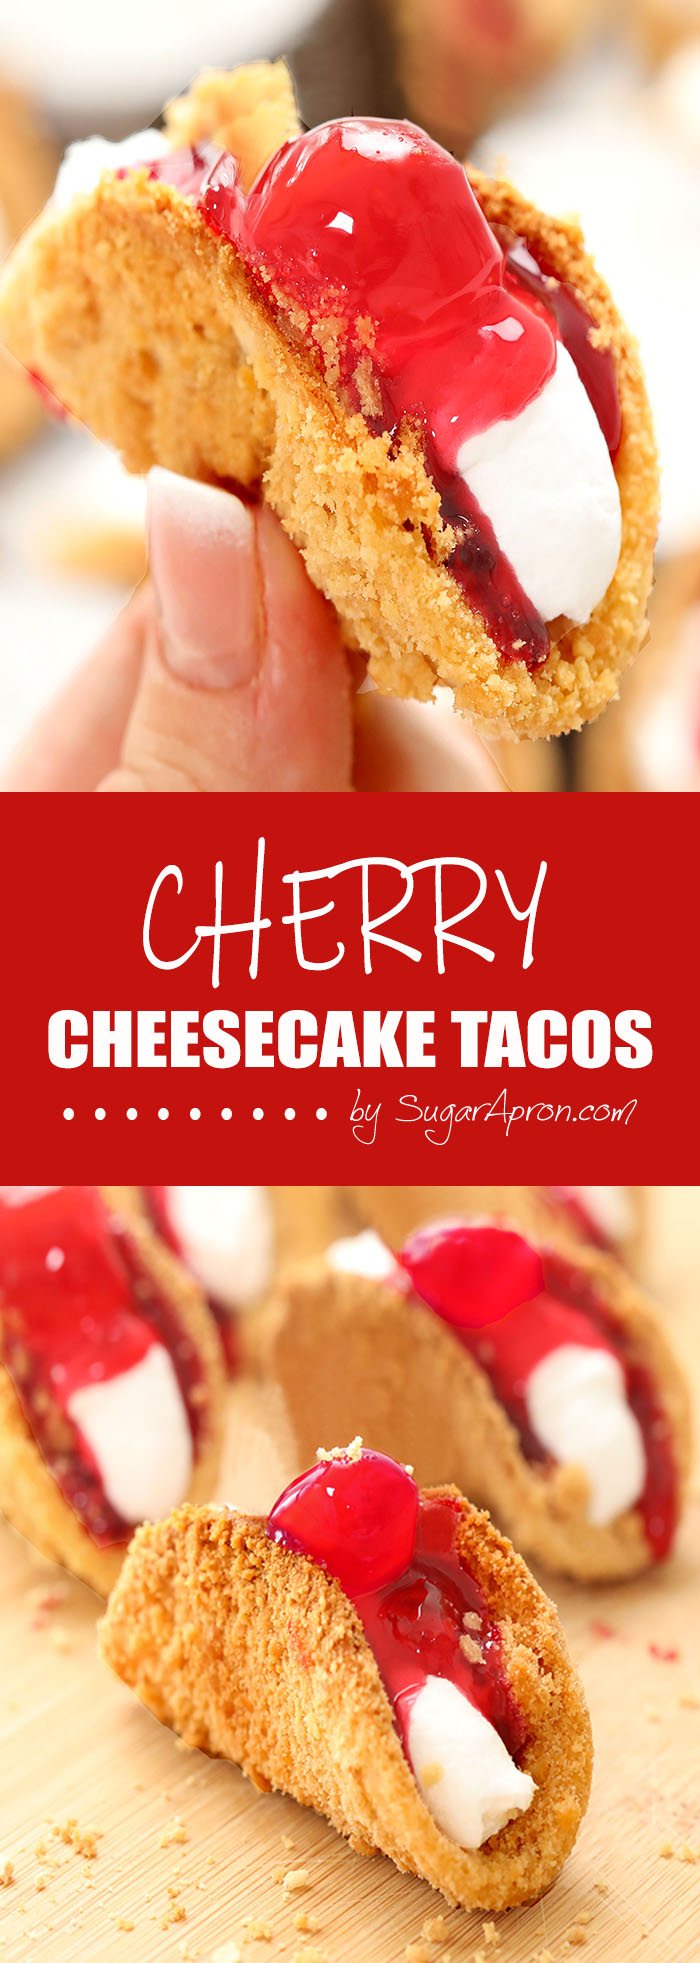 Cherry Cheesecake Tacos - a new favorite in your home and they couldn’t be easier. You’ll be enjoying this awesome dessert in about 20 minutes.